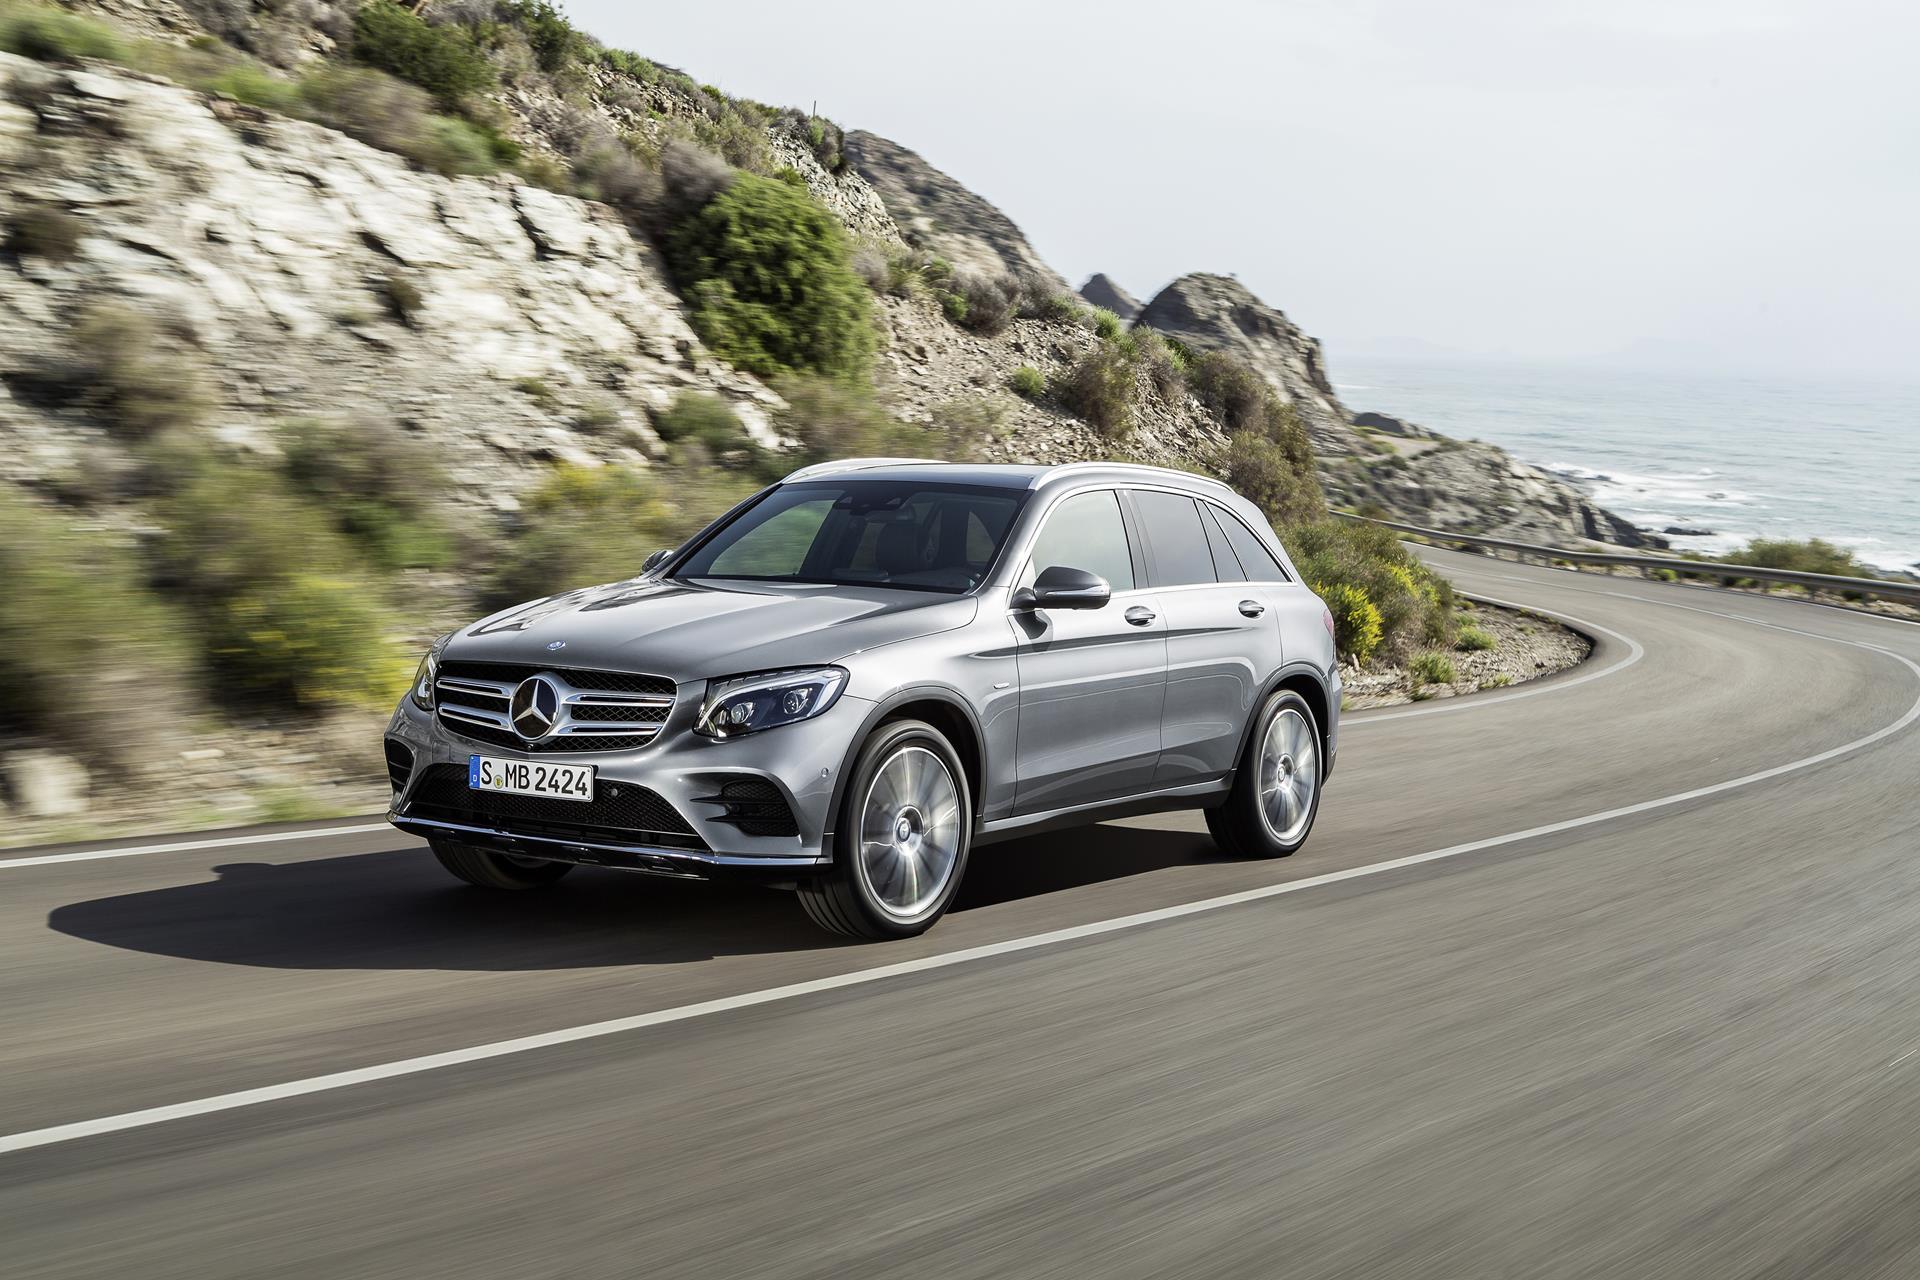 Mercedes Benz GLC Wallpaper And Image Gallery